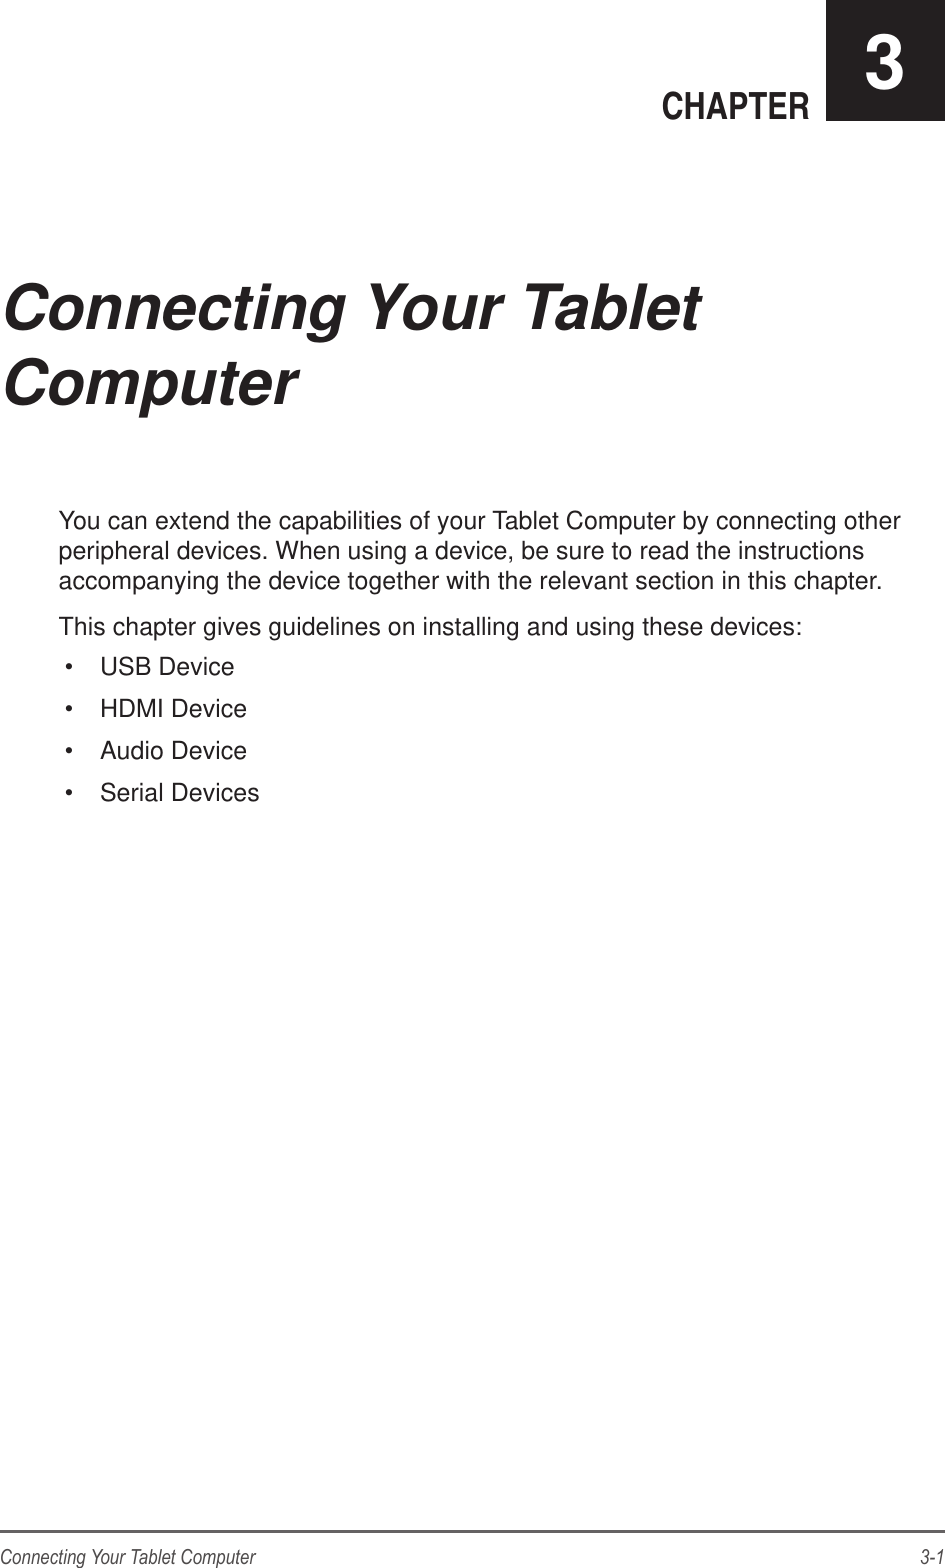 3-1Connecting Your Tablet ComputerCHAPTER 3You can extend the capabilities of your Tablet Computer by connecting other peripheral devices. When using a device, be sure to read the instructions accompanying the device together with the relevant section in this chapter.This chapter gives guidelines on installing and using these devices:•  USB Device•  HDMI Device•  Audio Device•  Serial DevicesConnecting Your Tablet Computer